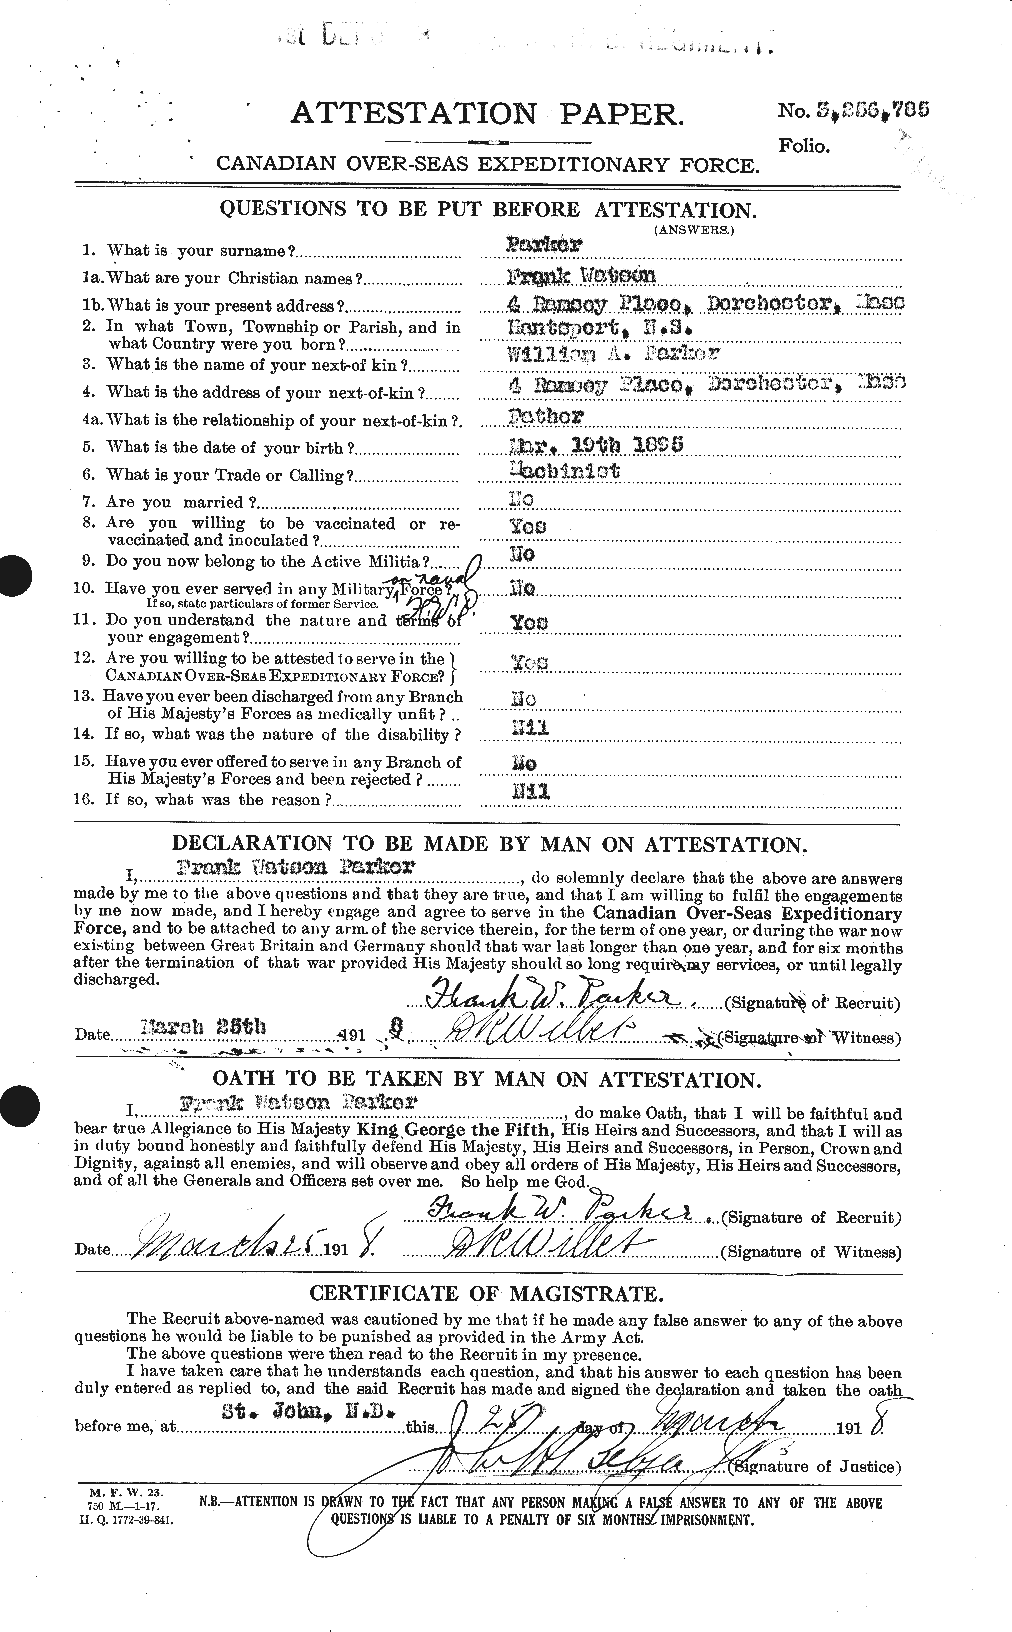 Personnel Records of the First World War - CEF 565197a